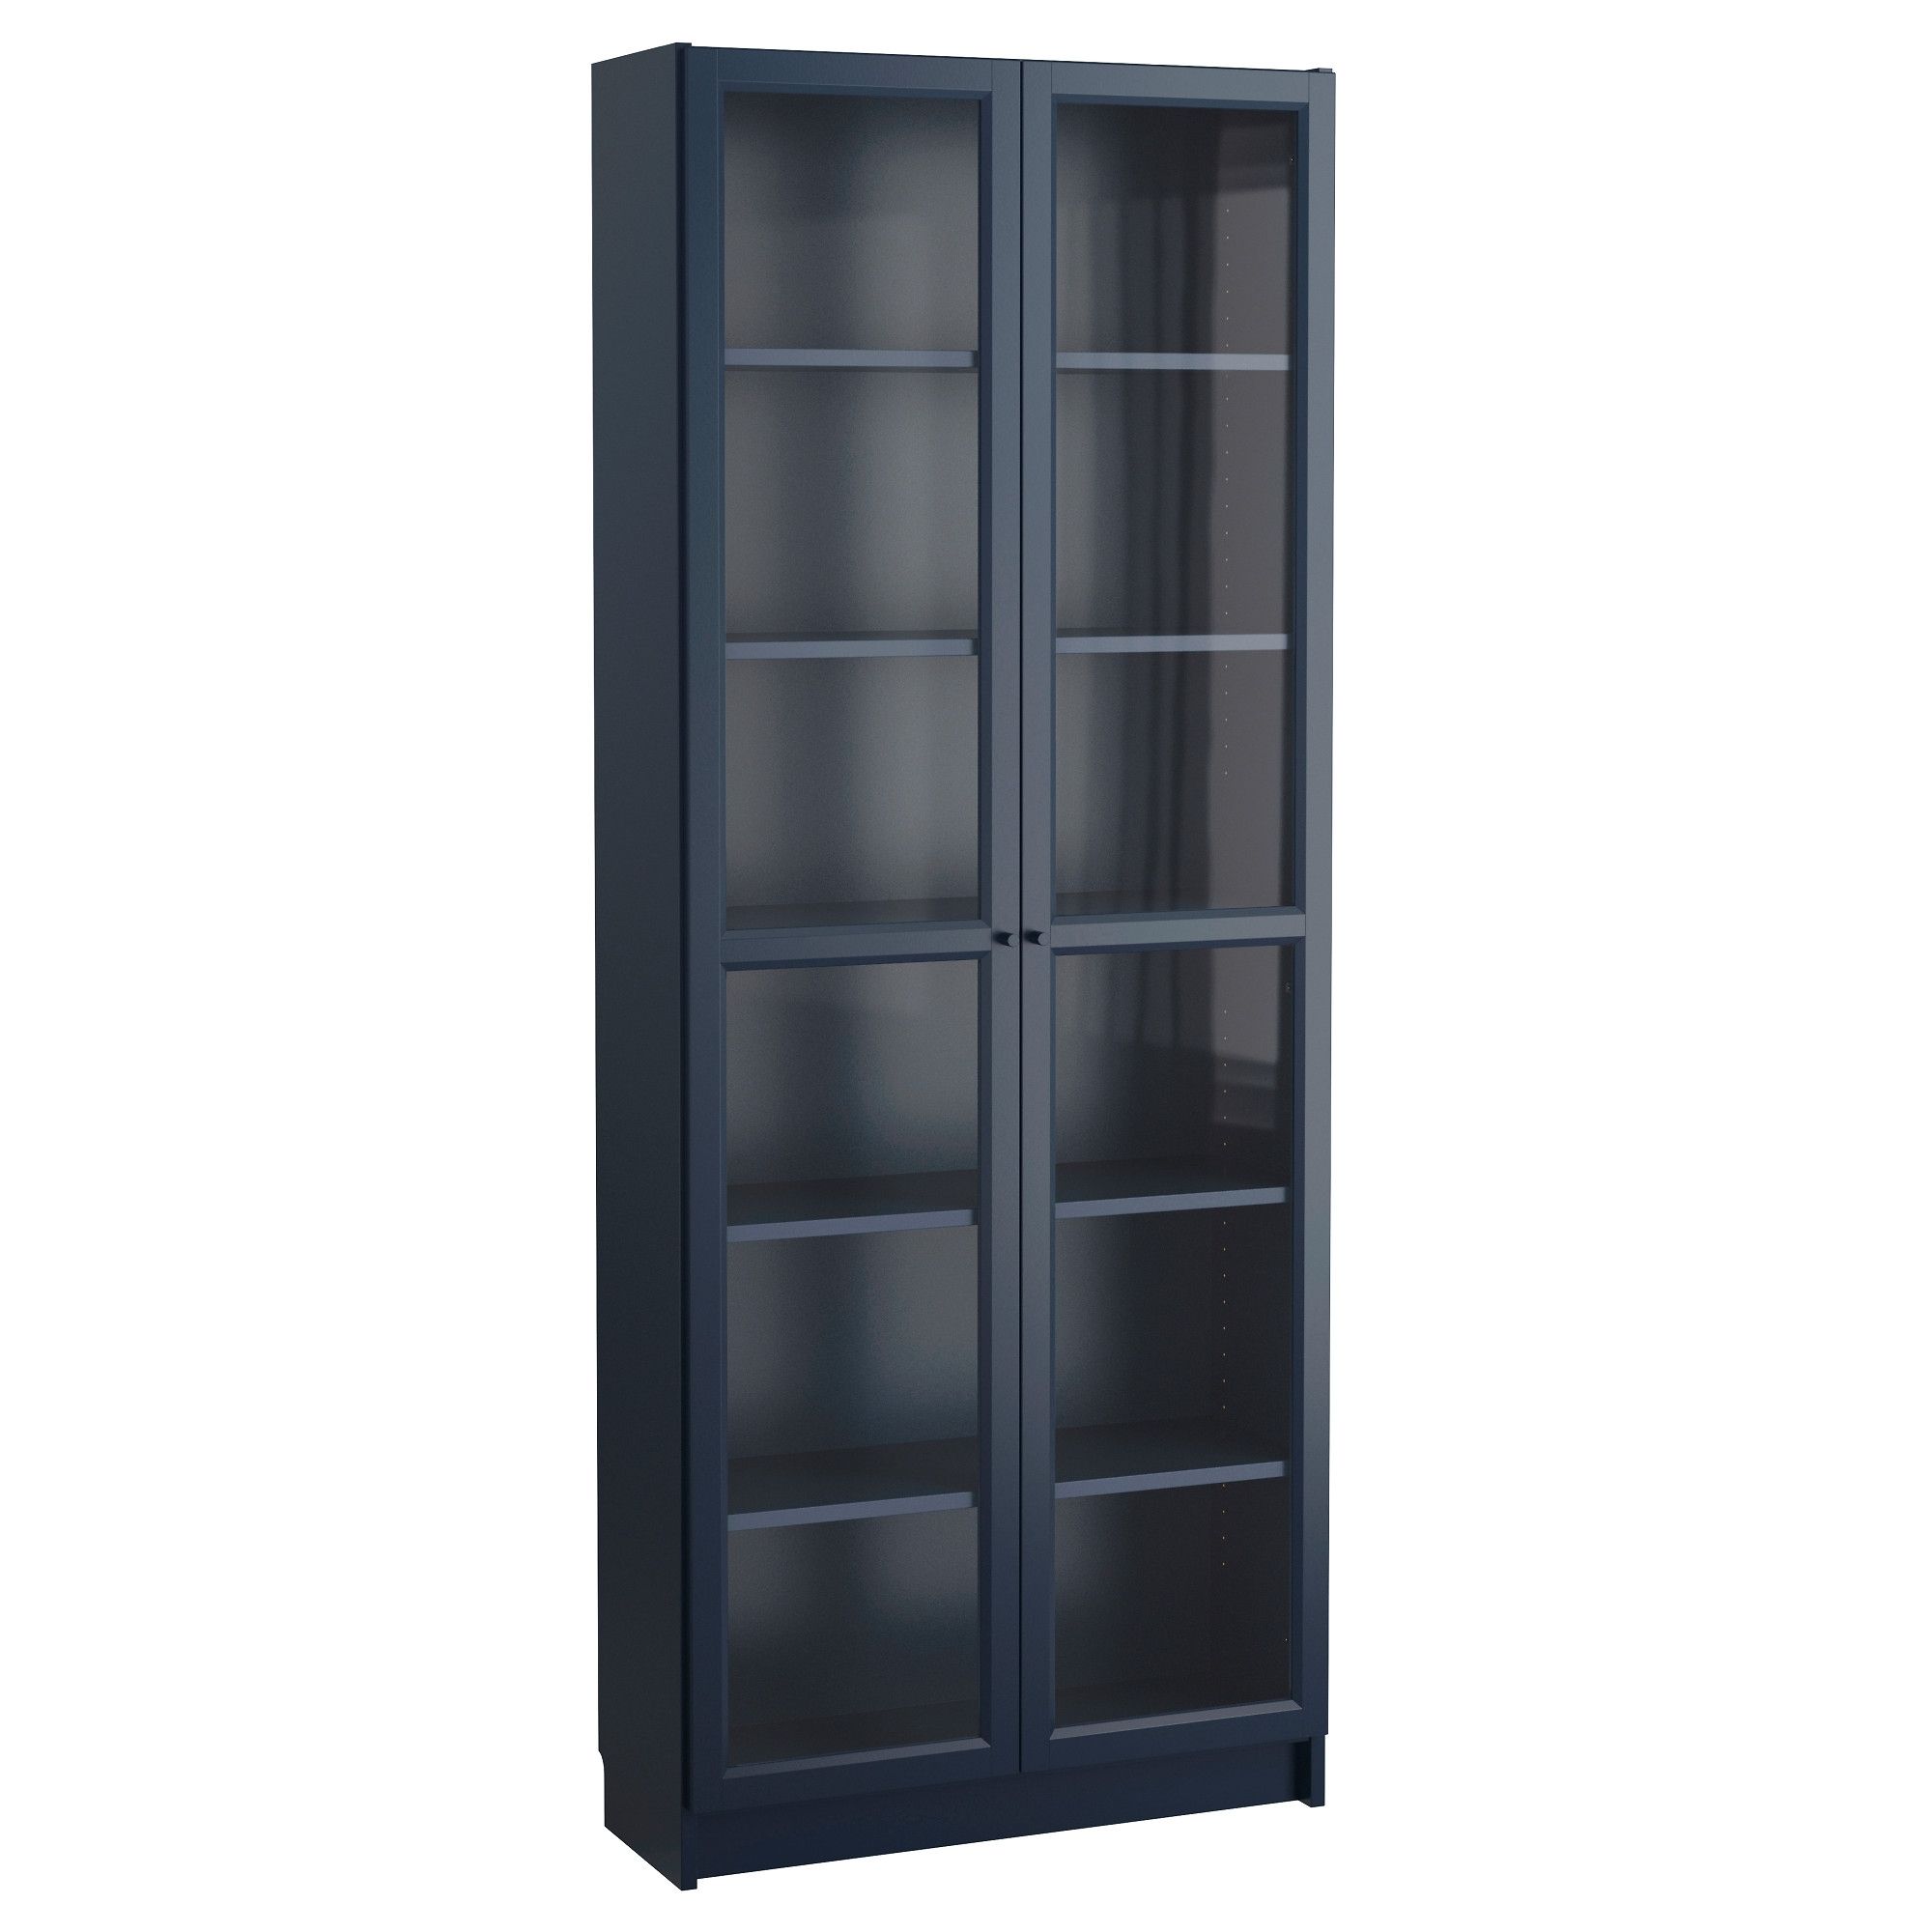 Bookcases With Glass Doors Within 2017 Billy Bookcase With Glass Doors Dark Blue 80x30x202 Cm – Ikea (View 3 of 15)